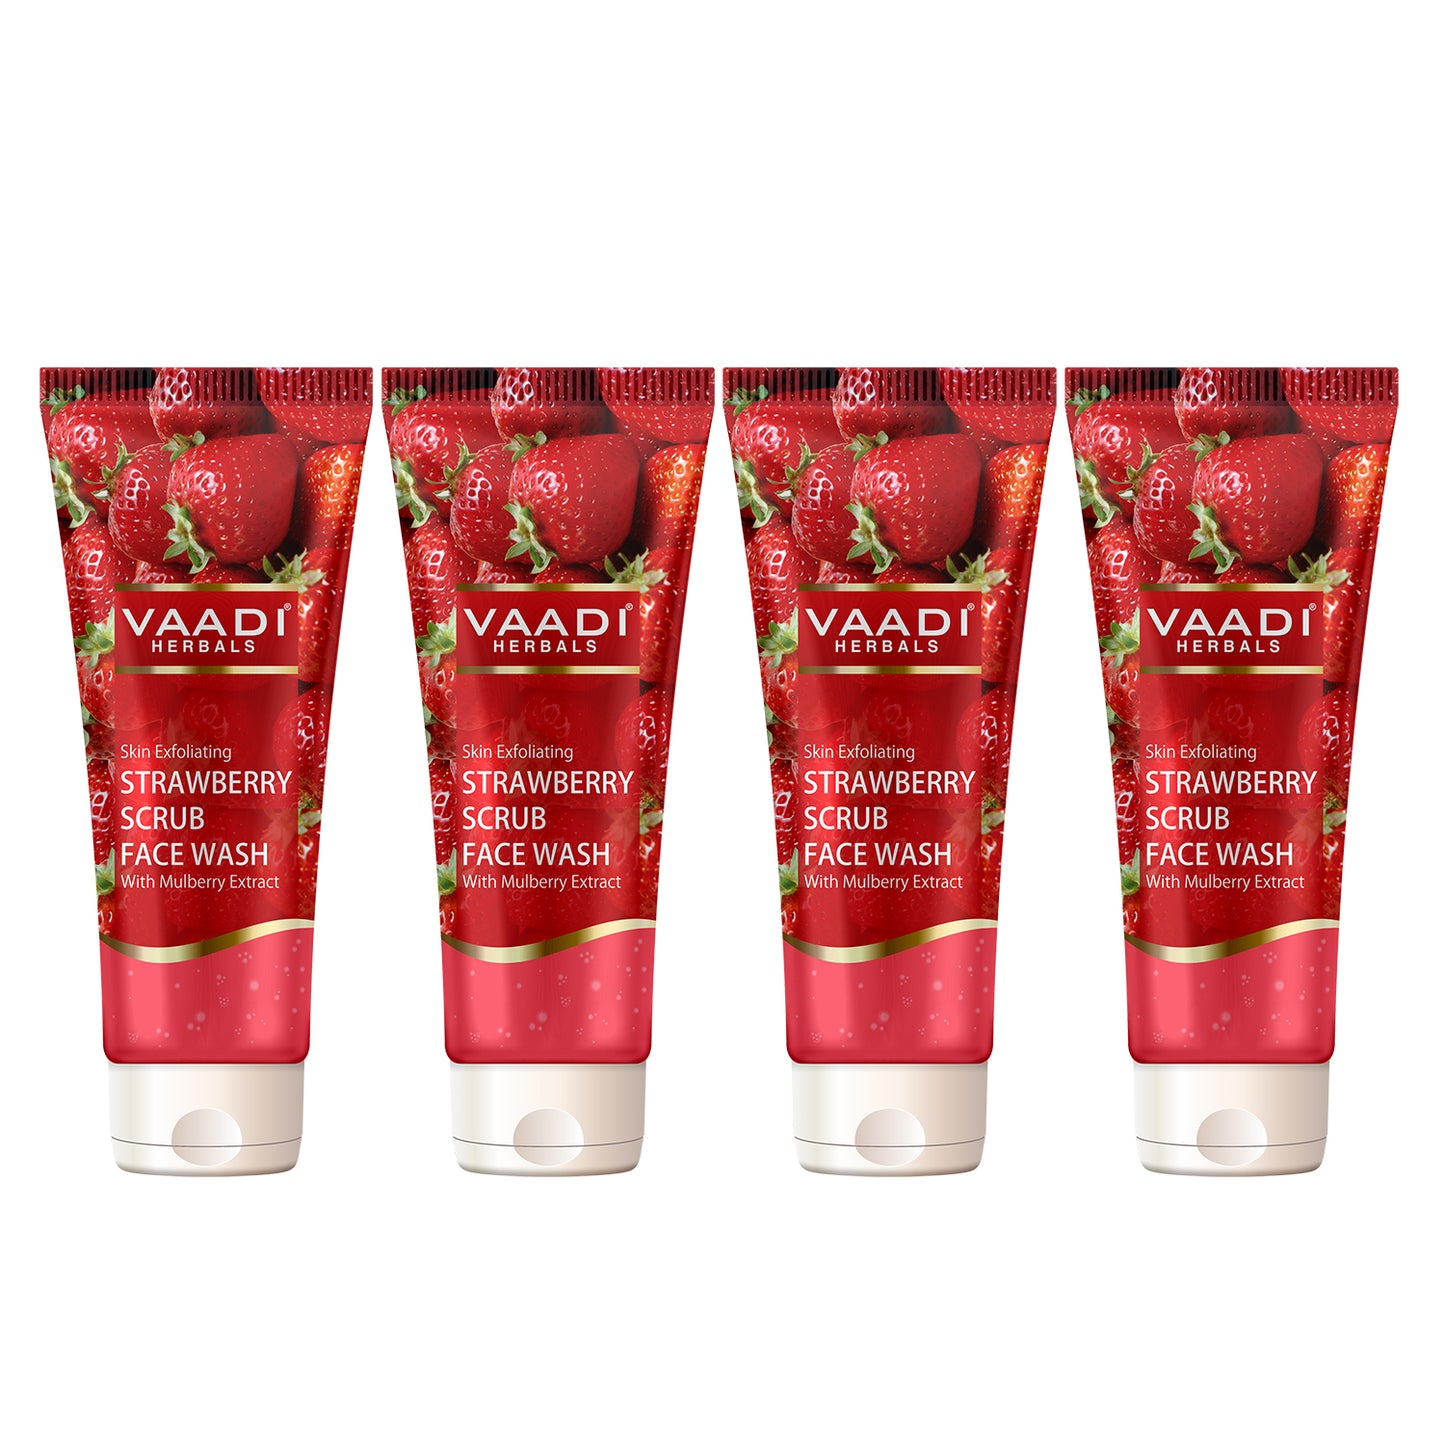 Skin Exfoliating Organic Strawberry Scrub Face Wash with Mulberry Extract- Removes Dead Skin - Deeply Nourishes Skin ( 4 x 60ml/ 21.1 fl oz)